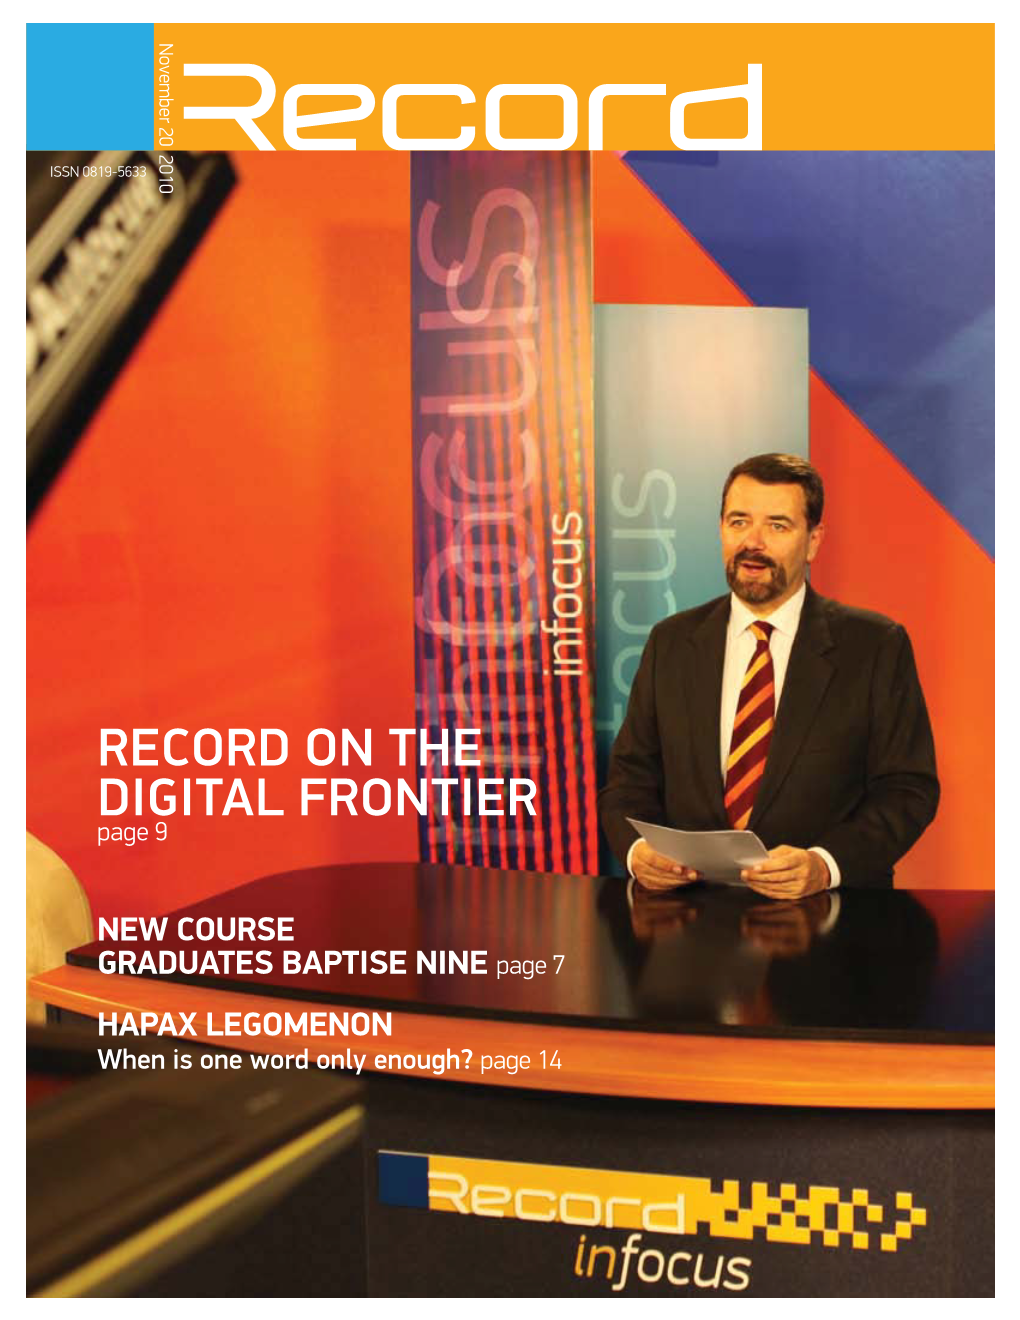 RECORD on the Digital Frontier by Kent Kingston